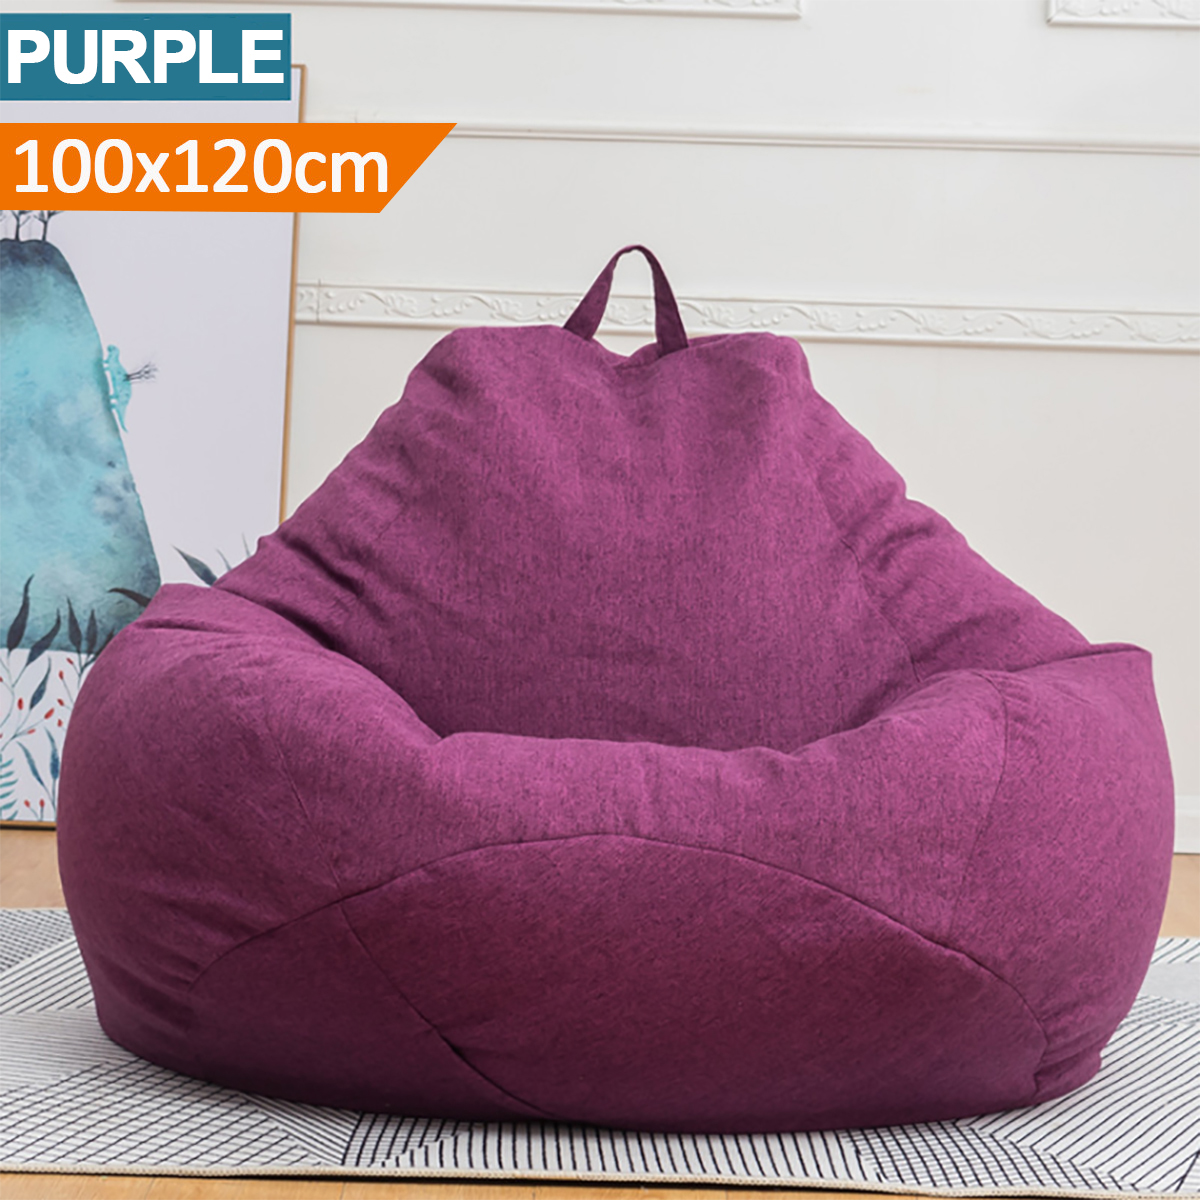 Extra Large Bean Bag Chair Lazy Sofa Cover Indoor Outdoor Game Seat BeanBag 7